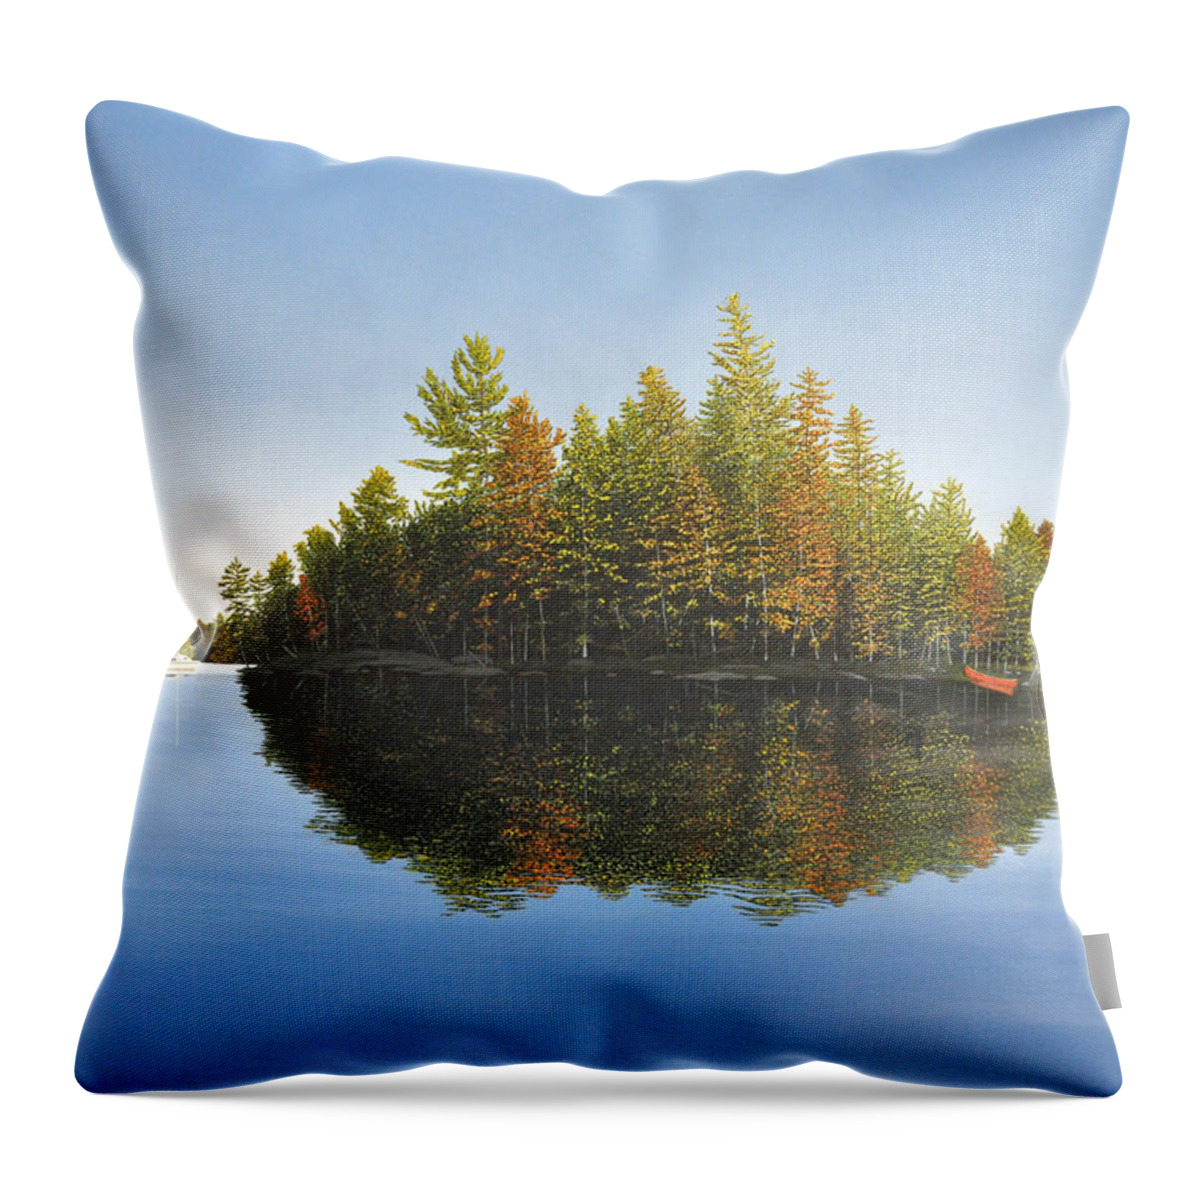 Landscapes Throw Pillow featuring the painting Muskoka Island  by Kenneth M Kirsch